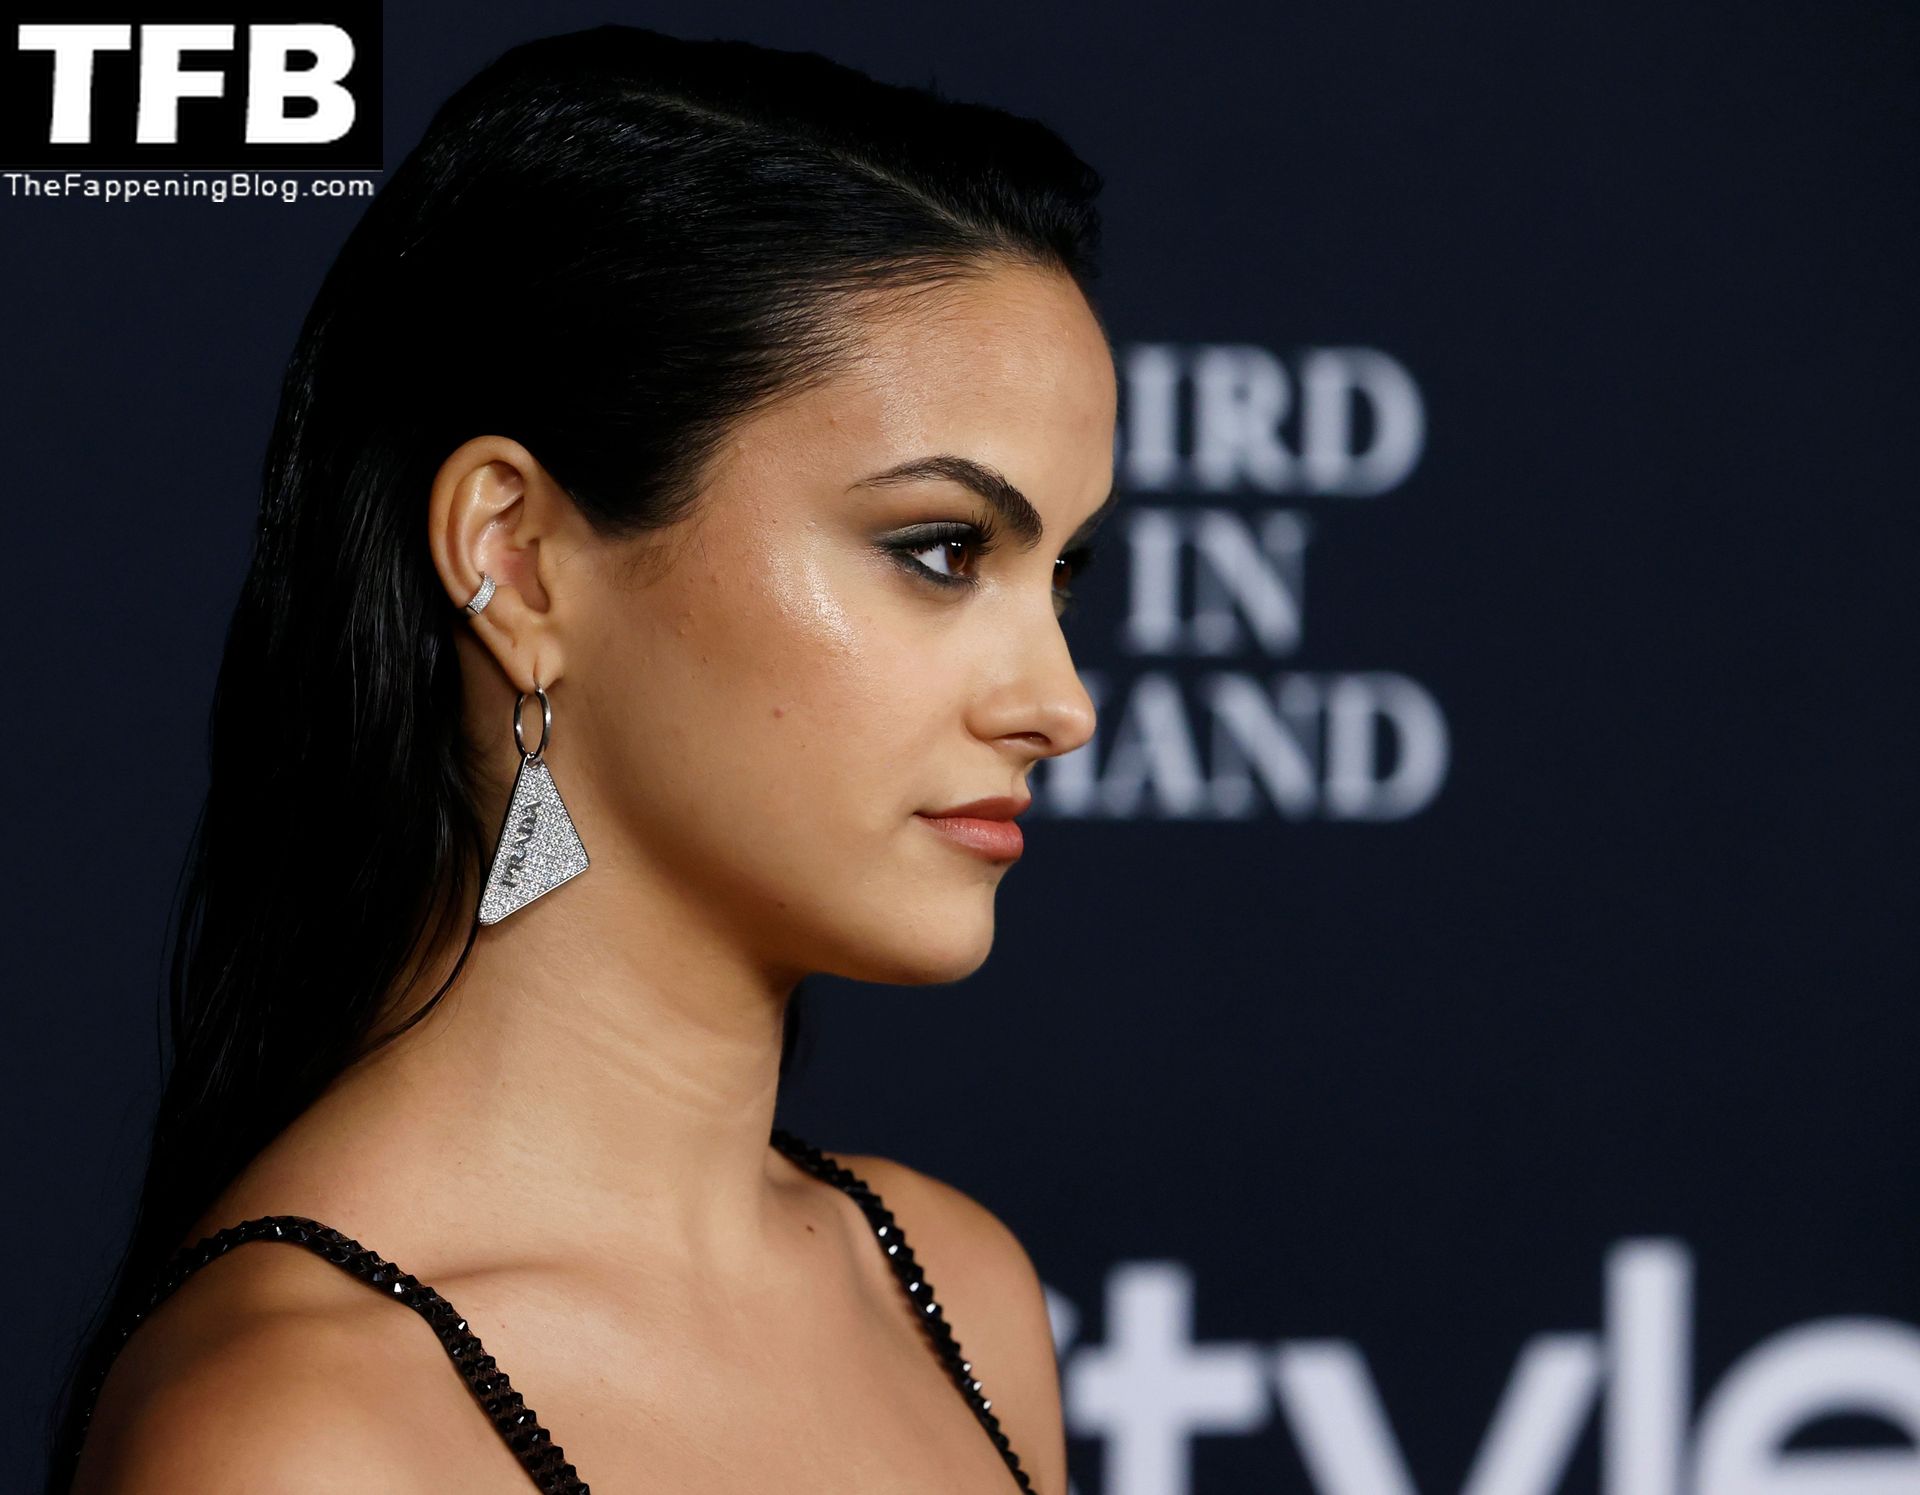 Camila-Mendes-See-Through-Tits-The-Fappening-Blog-28.jpg